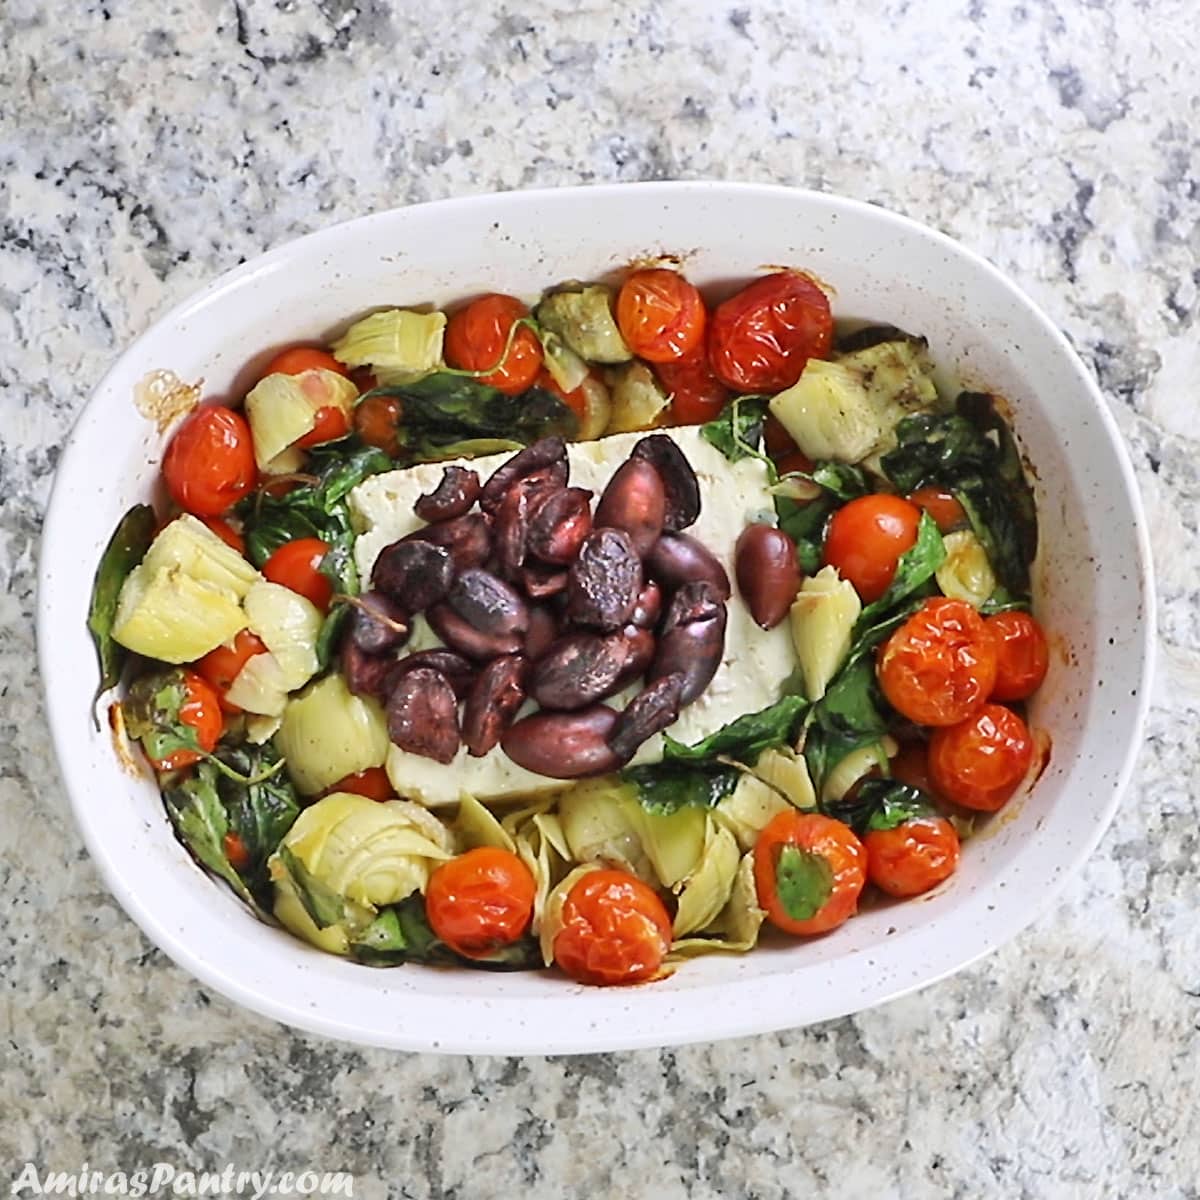 A white dish with baked feta topped with kalamata olives and other vegetables on the dish.